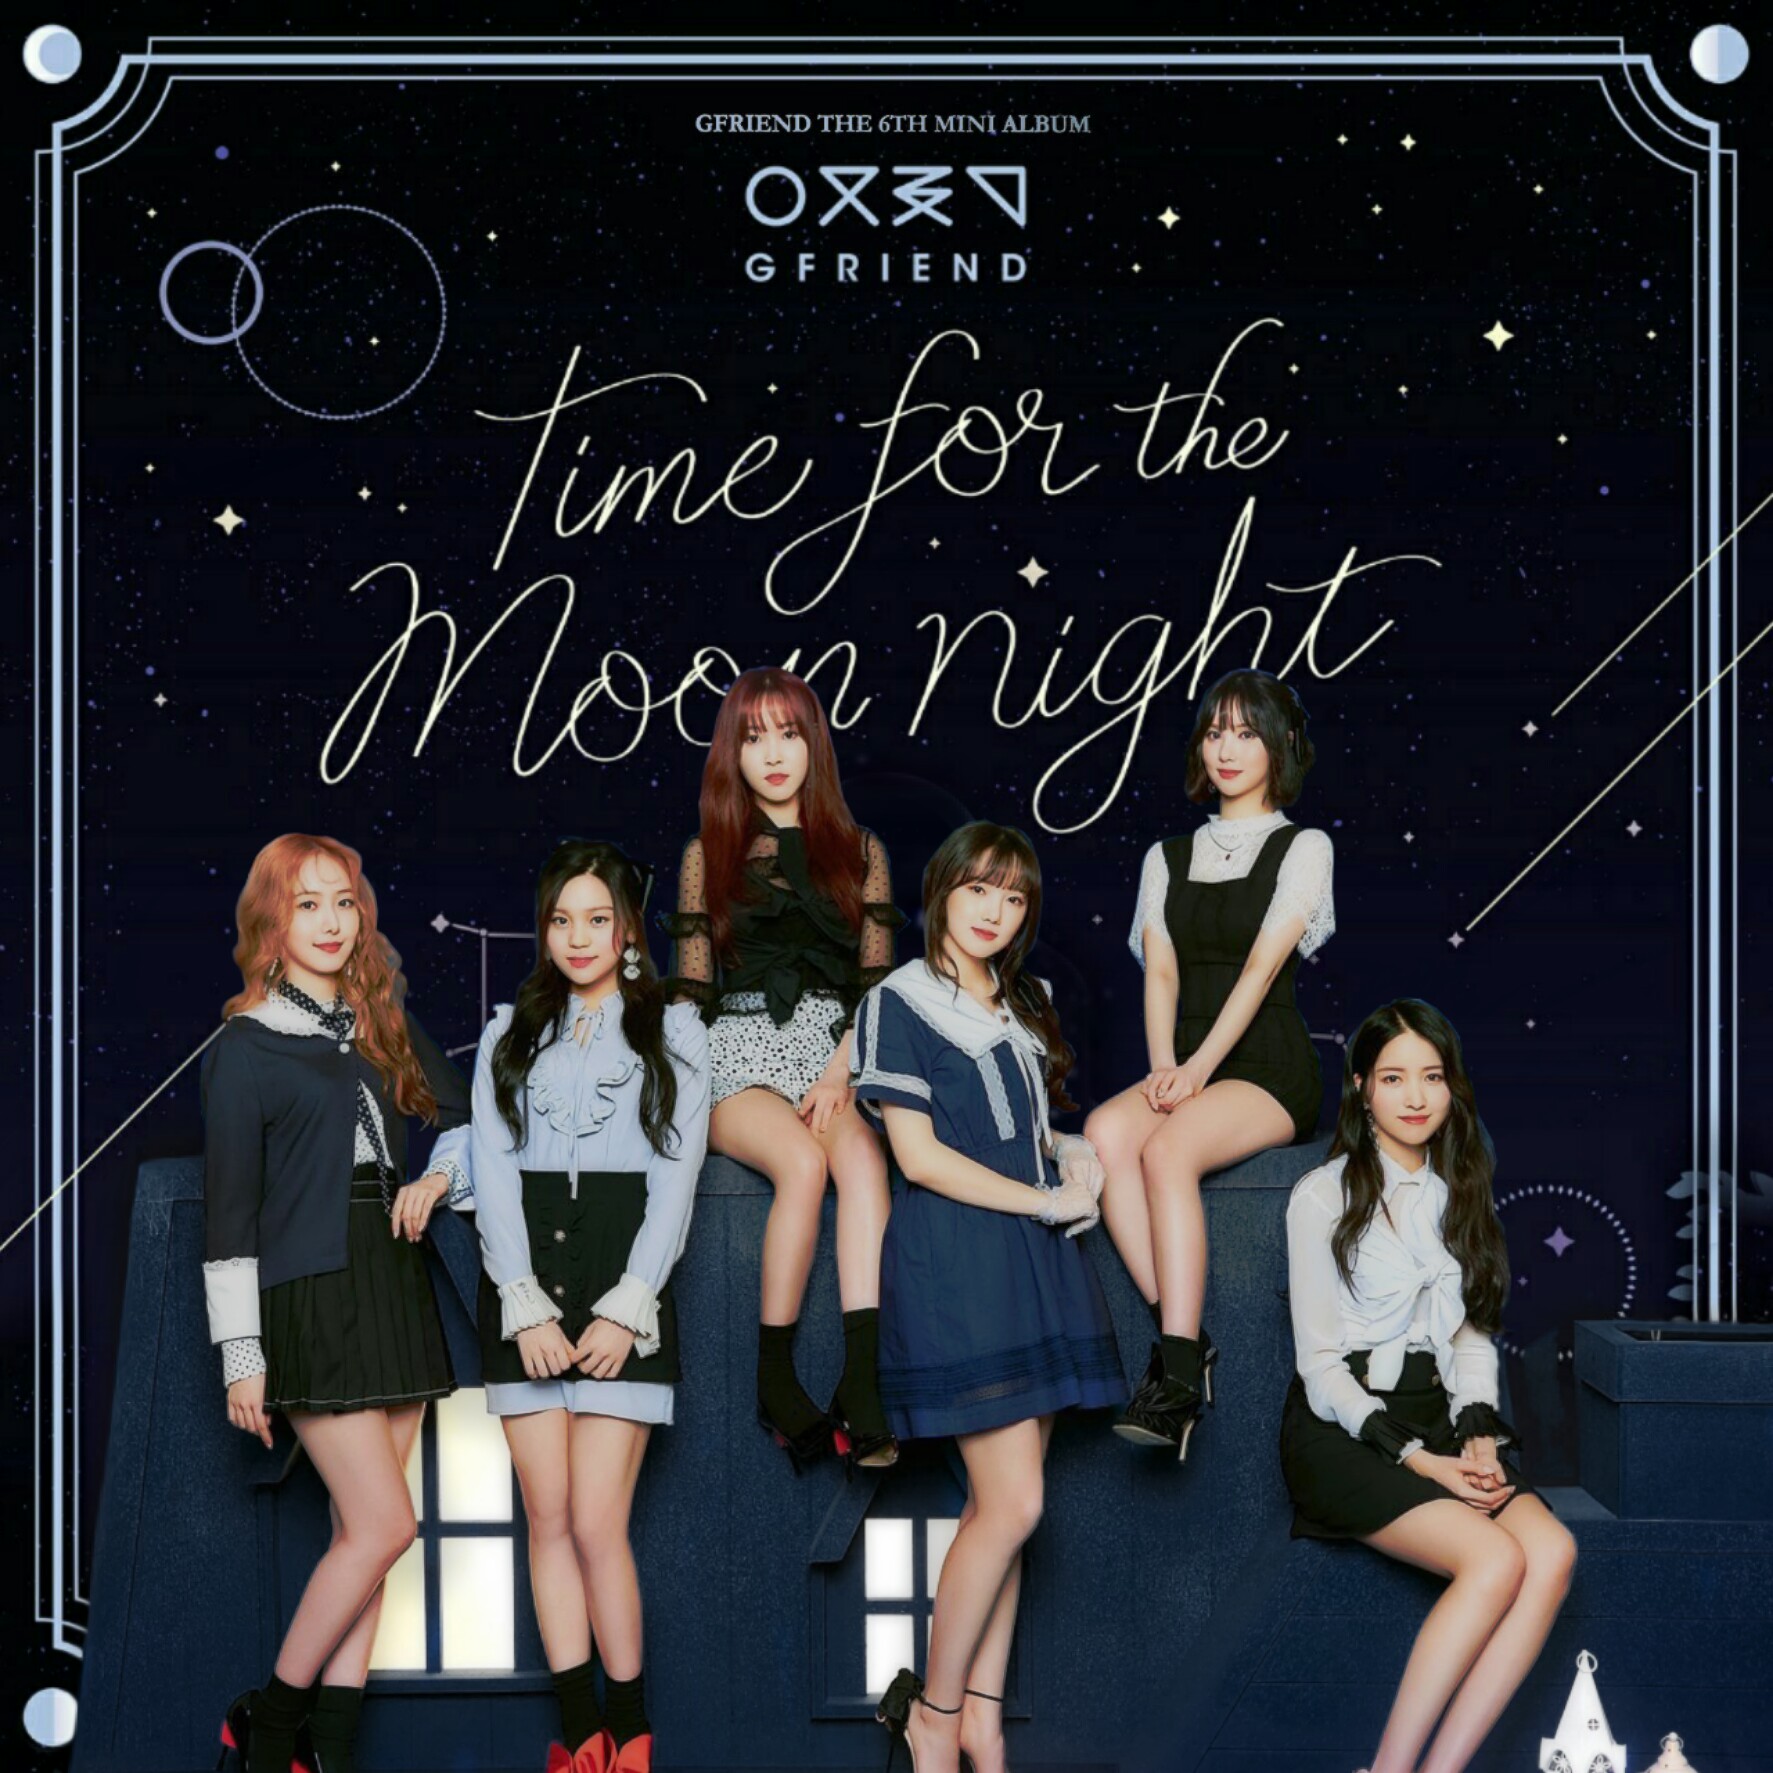 GFRIEND TIME FOR THE MOON NIGHT album cover #2 by LEAlbum on DeviantArt